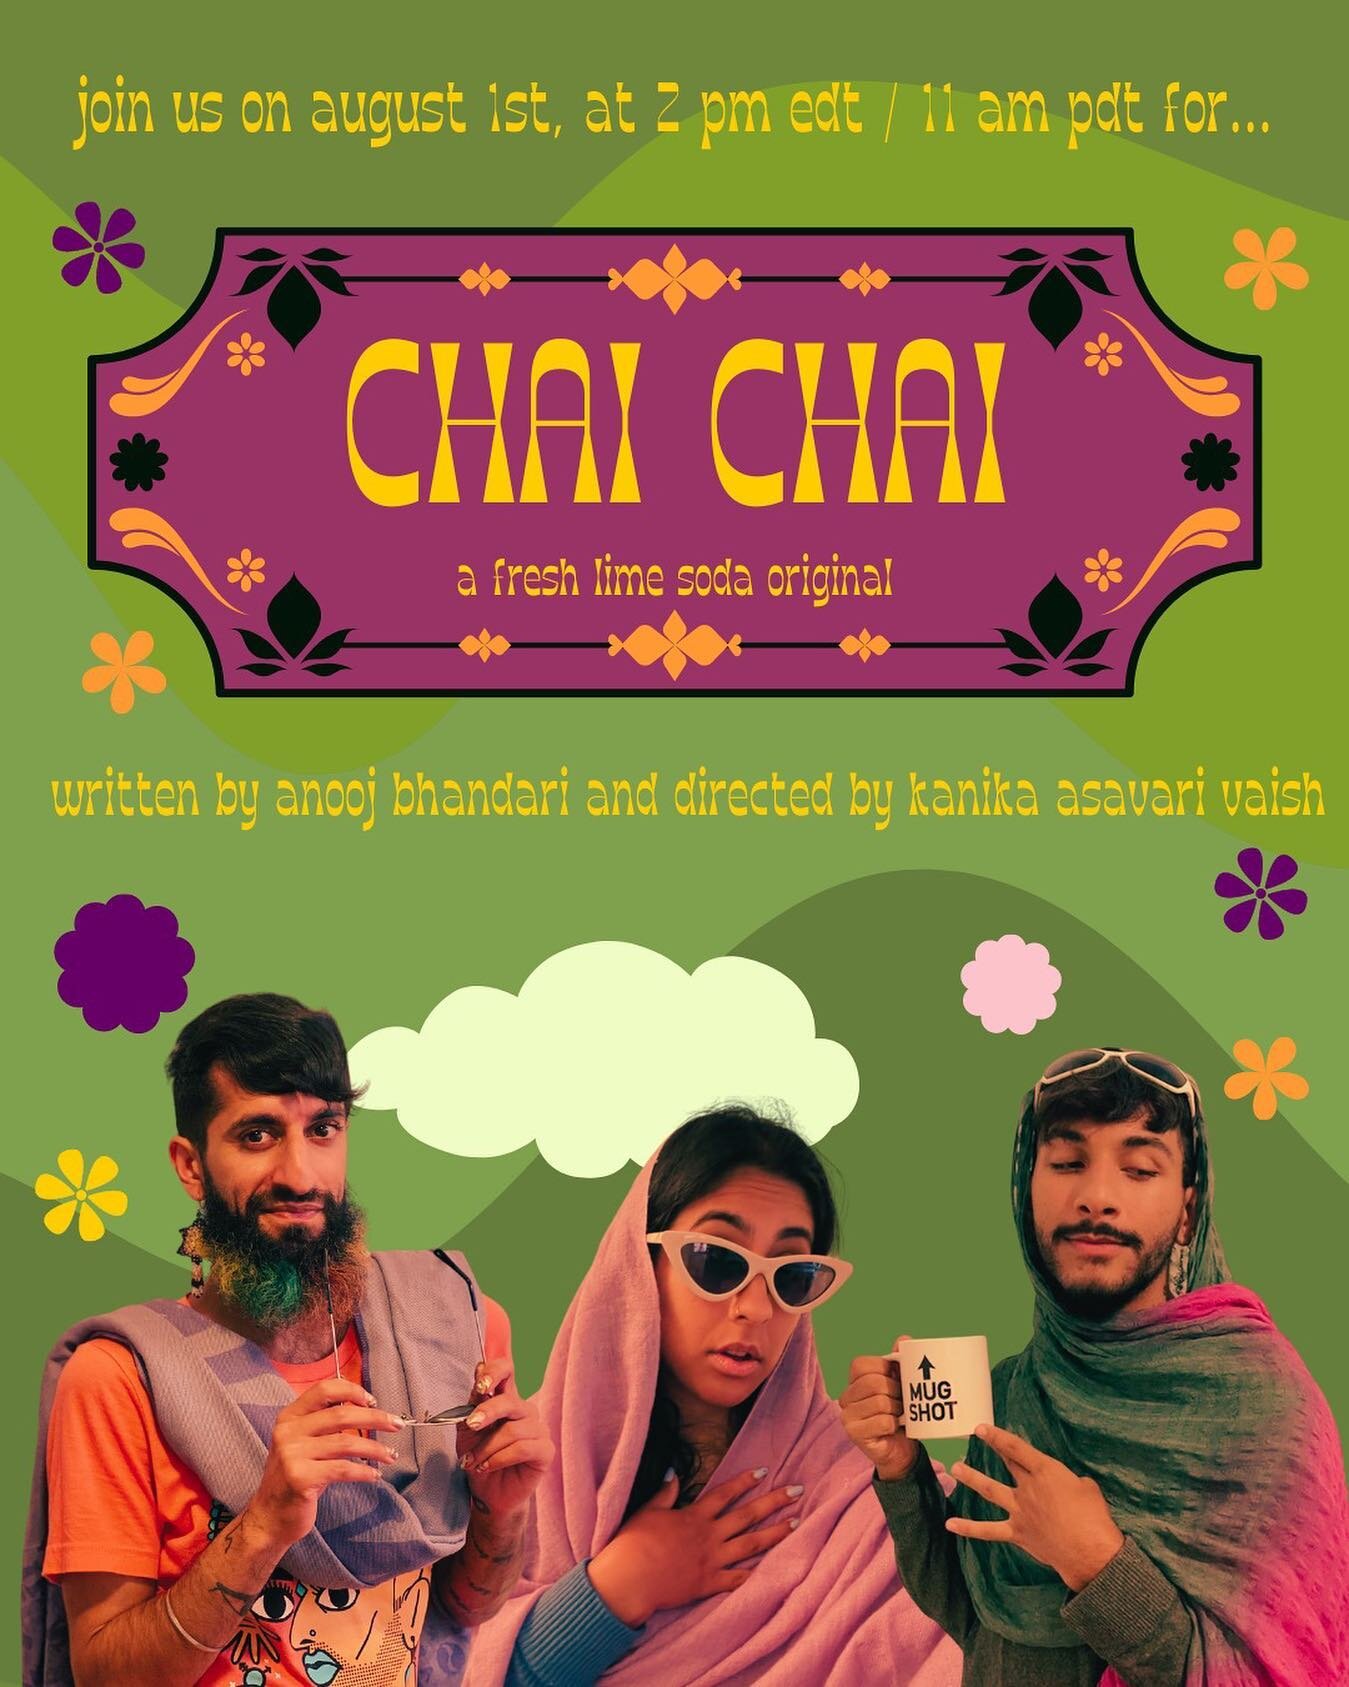 ⭐️☕️LET&rsquo;S☕️HEAR☕️IT☕️FOR☕️THE☕️AUNTIES☕️⭐️

LINK IN BIO TO REGISTER: bit.ly/chaiflsp

❤️

Join us for: CHAI CHAI, written by Anooj Bhandari and directed by Kanika Asavari Vaish! CHAI CHAI is a coming-of-age story told by three fly aunties about